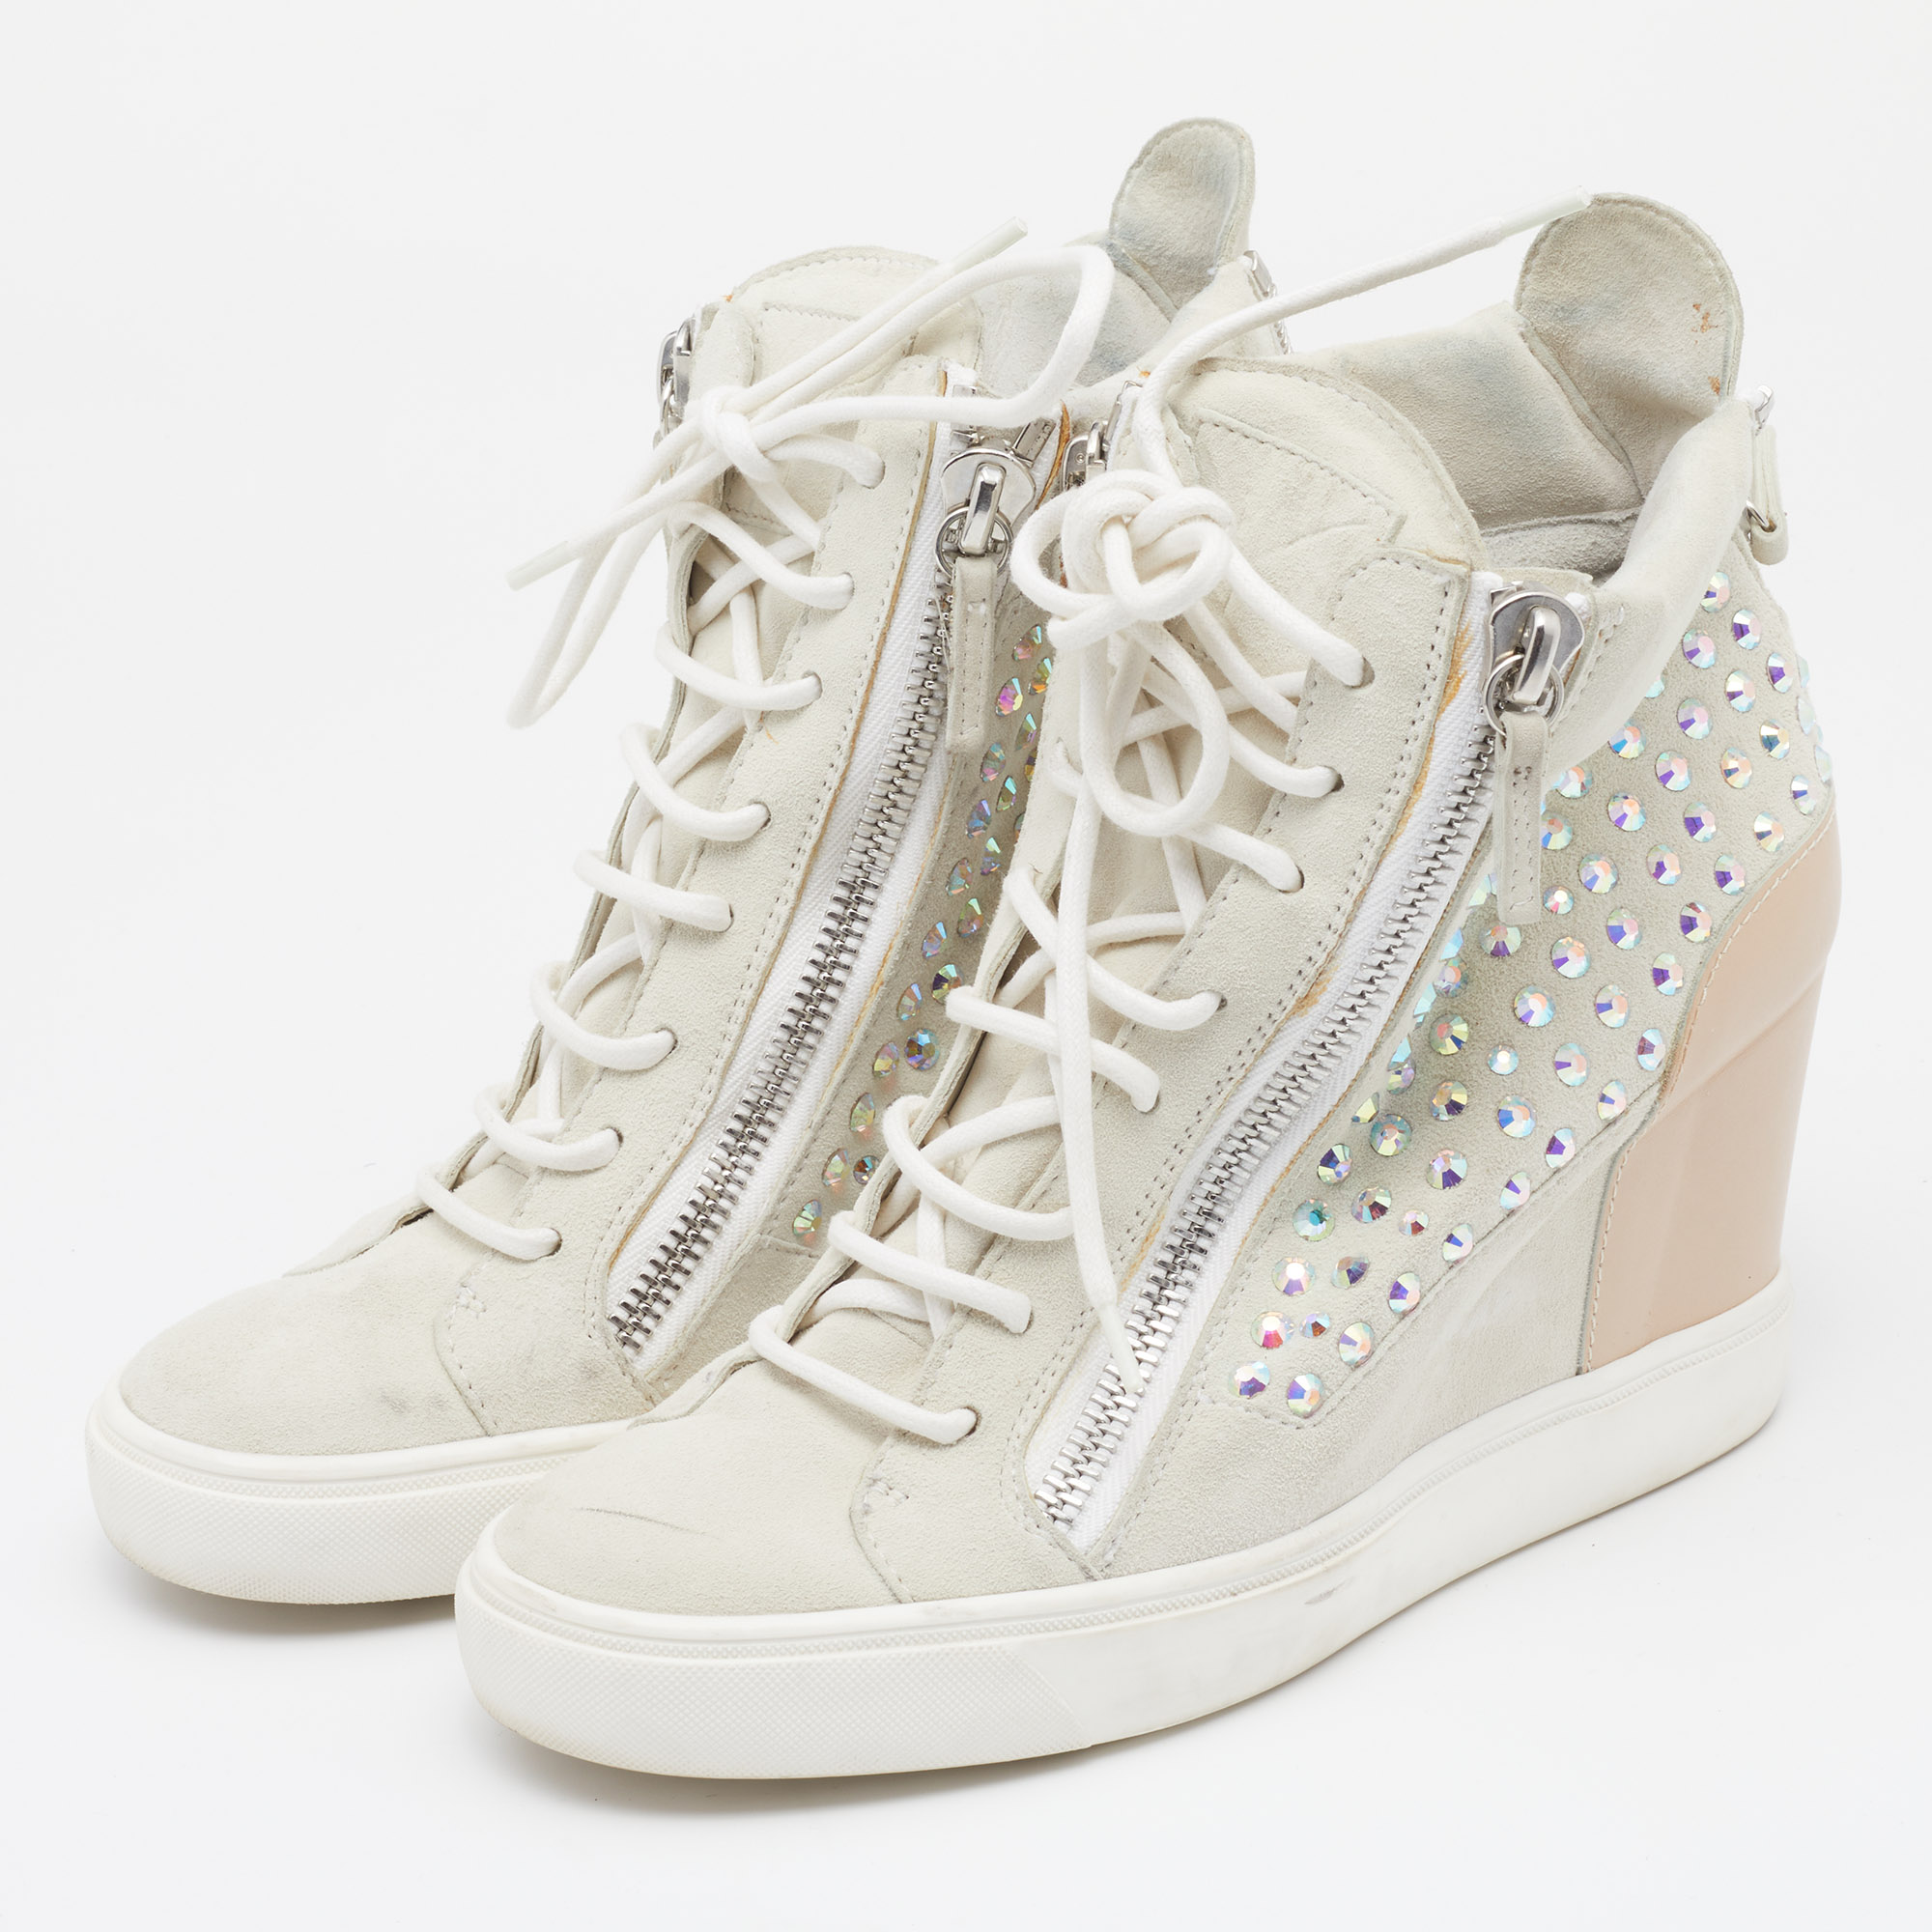 

Giuseppe Zanotti Light Grey/Beige Suede And Leather Embellished Wedge Sneakers Size